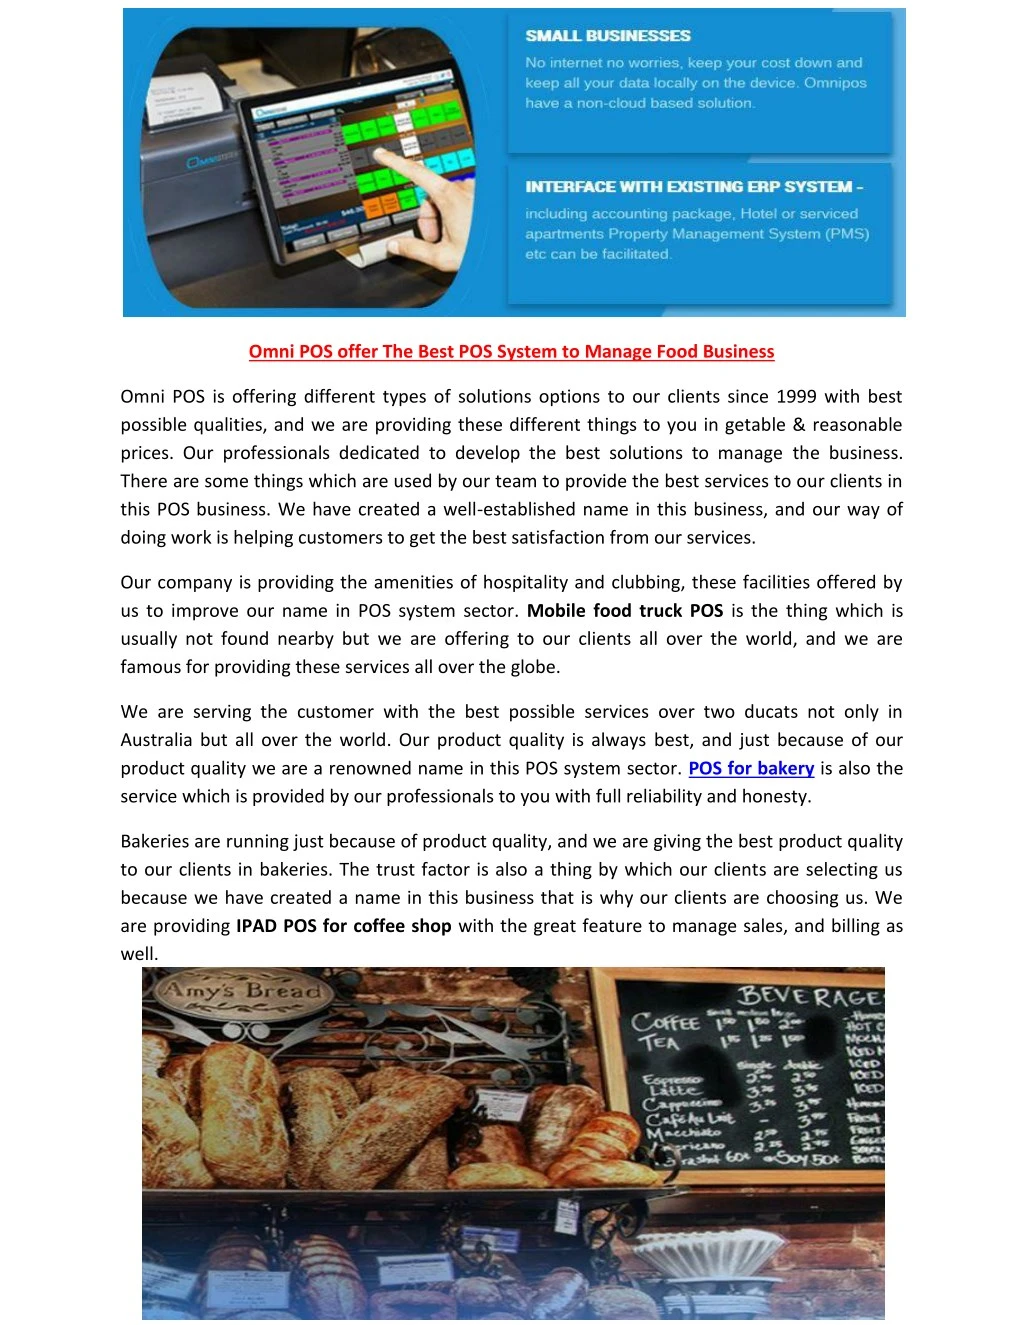 omni pos offer the best pos system to manage food